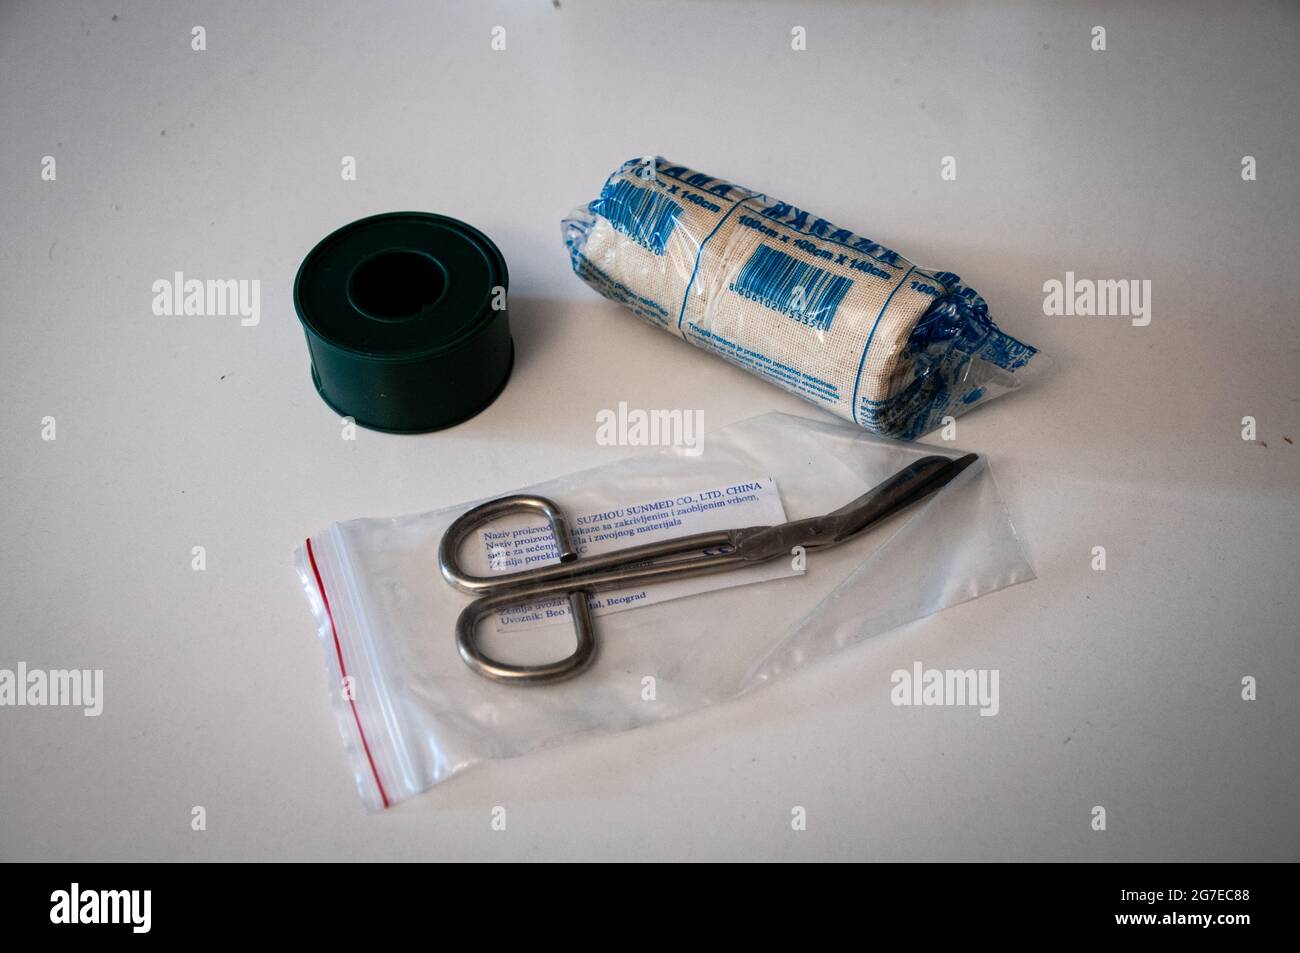 Medical Dressing High Resolution Stock Photography and Images - Alamy